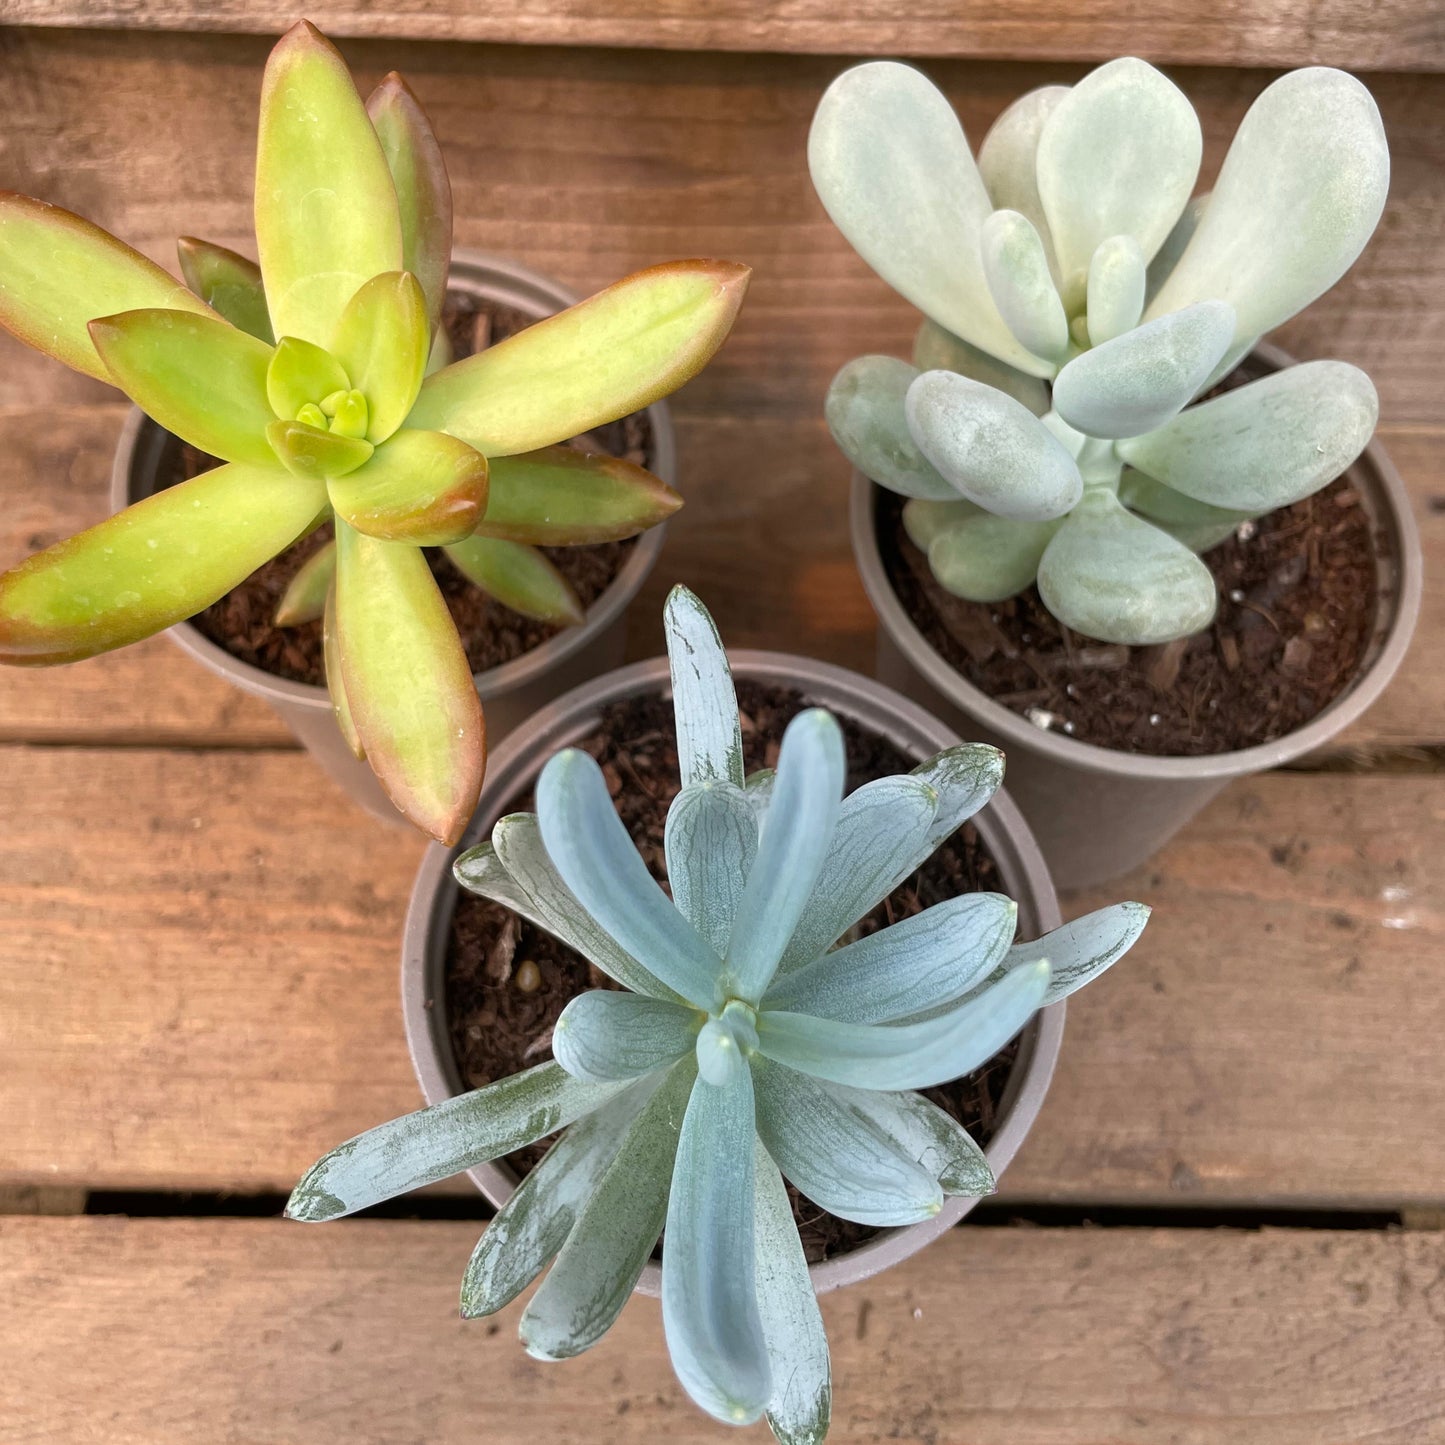 Unusual Succulent Collection